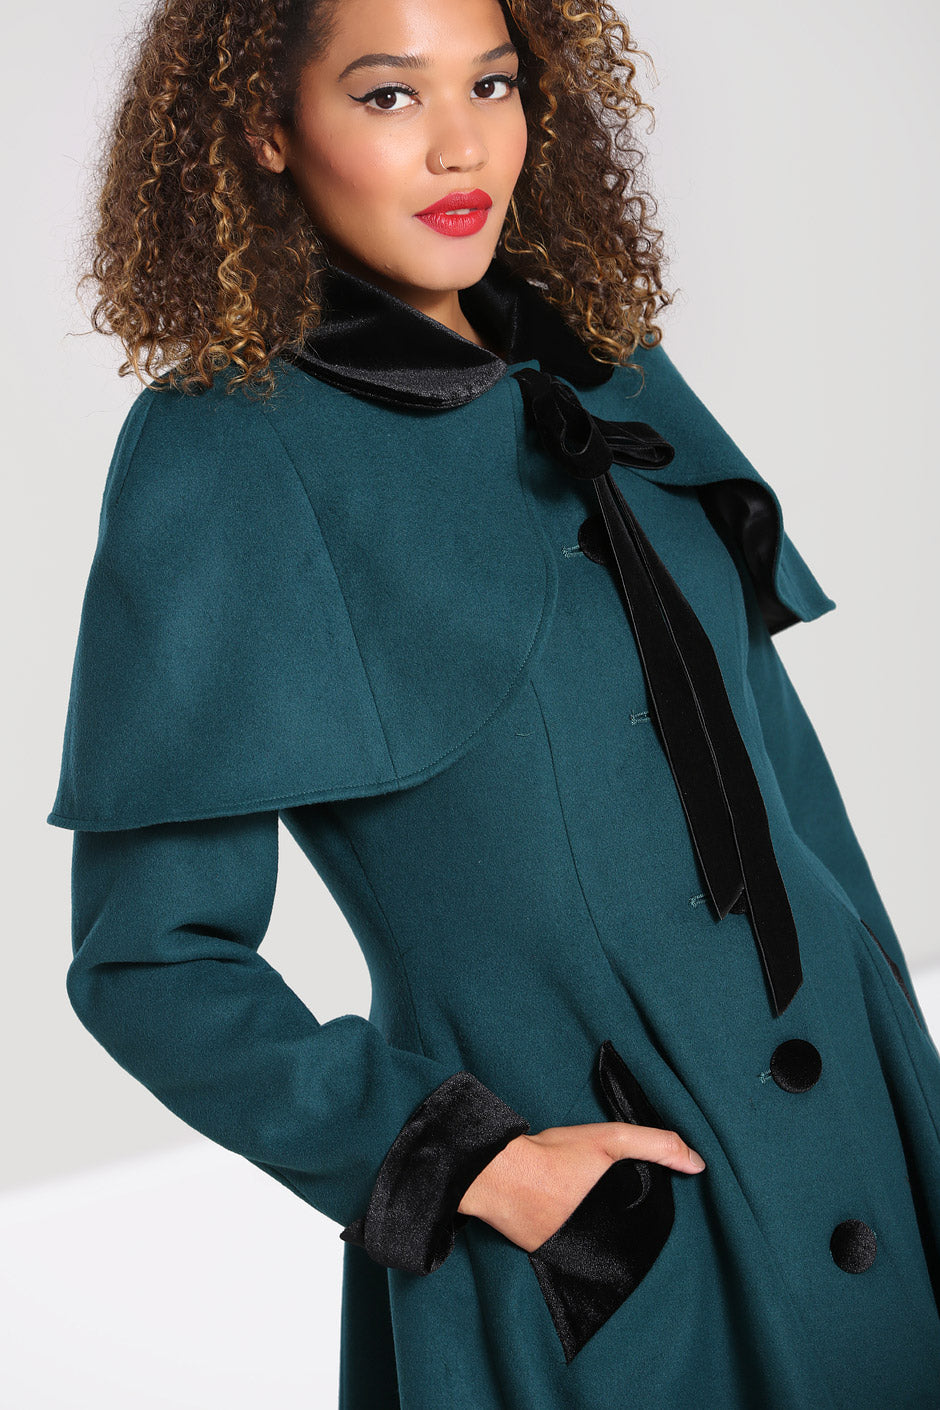 Beautiful curly haired model wearing a vintage green coat with cape 